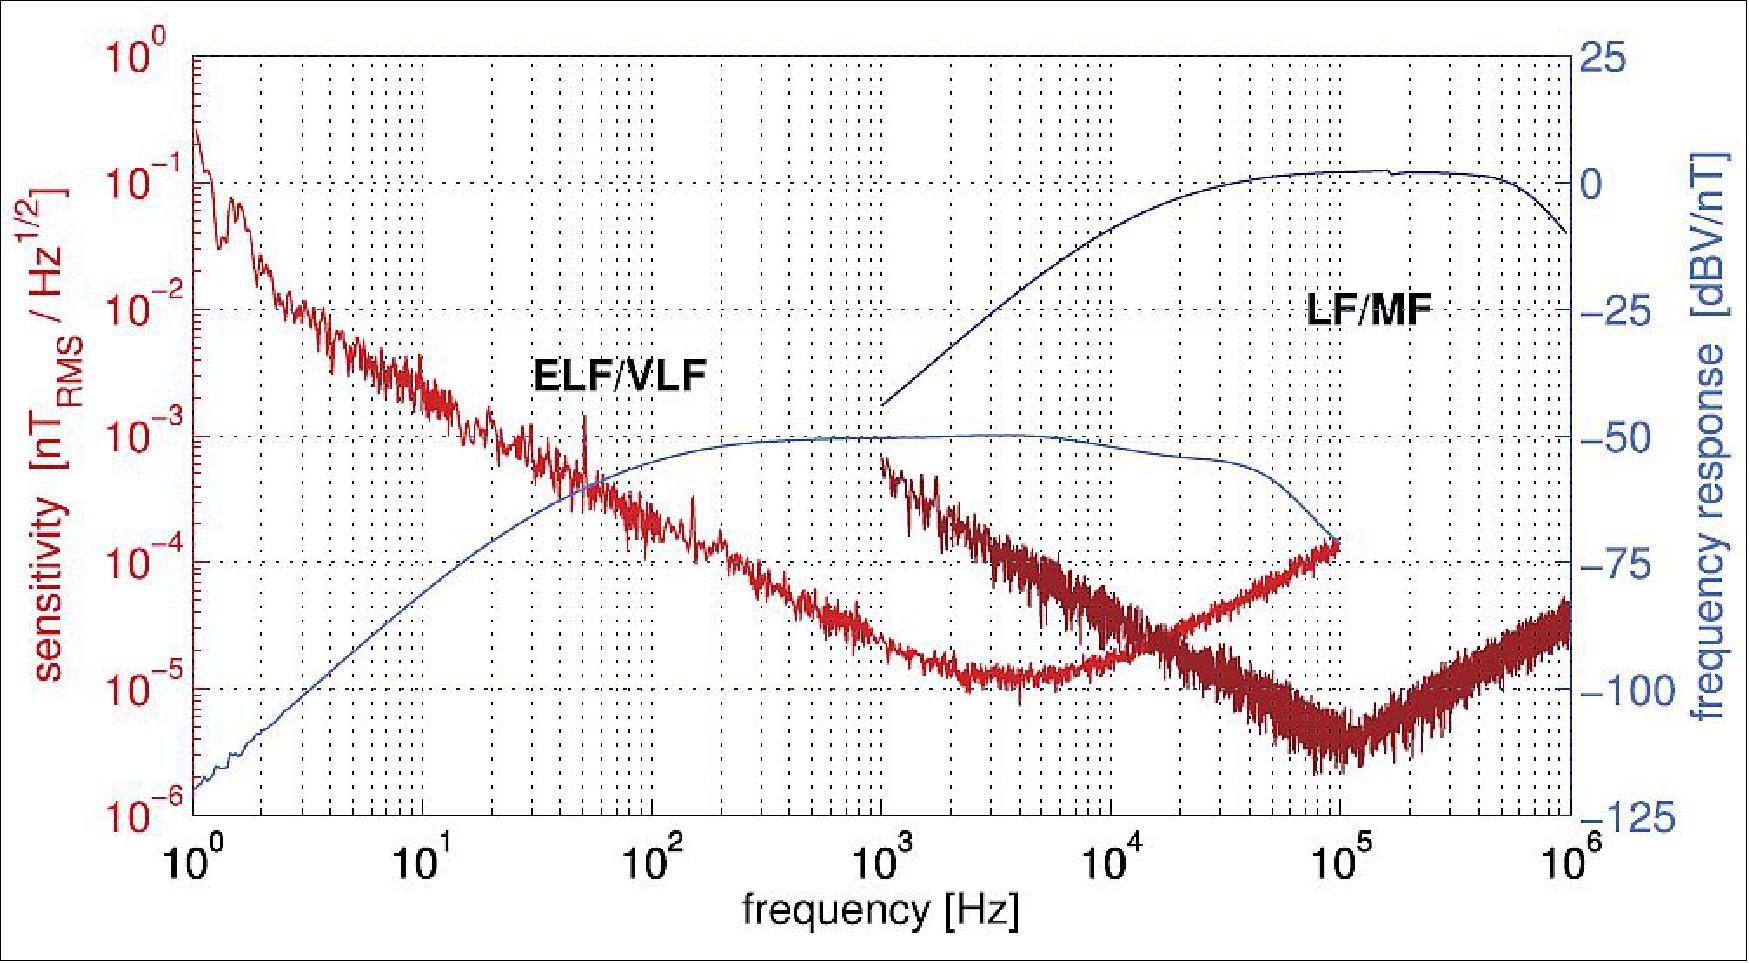 Figure 120: Measured sensitivity (in red) and frequency response (in blue) of SCM. The curves on the left are for the ELV/VLF antenna and the curves on the right for the LF/MF one. The highest measurable levels are 3000 nT in the ELF/VLF range, and 100 nT in the LF/MF range (image credit: FIELDS collaboration)